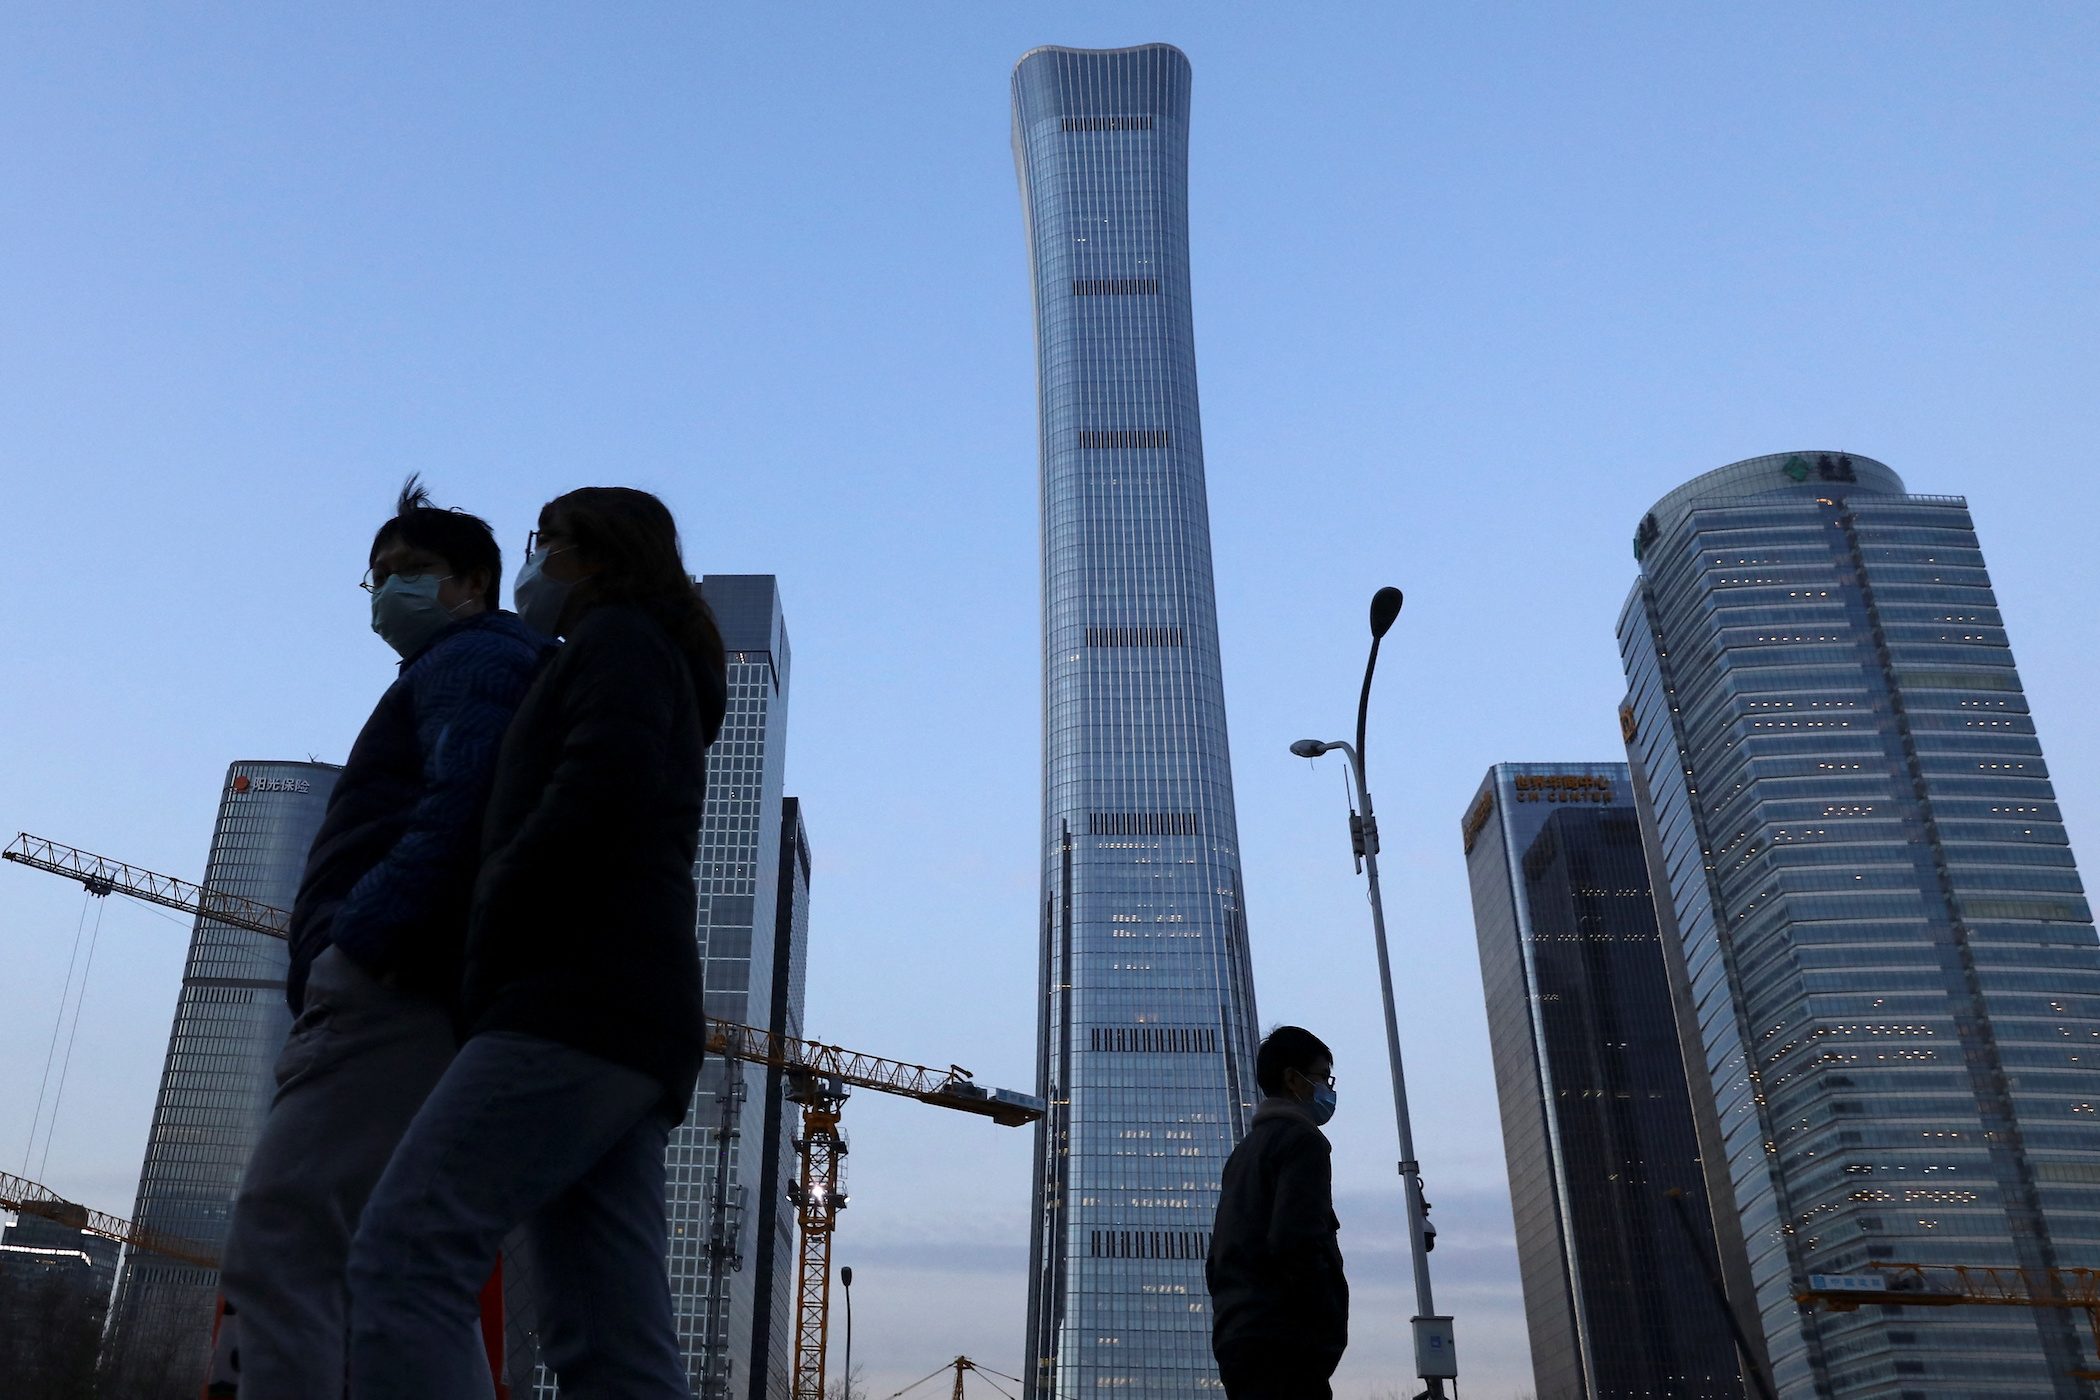 China biggest property developer swoops in with mini buyback as bonds slump